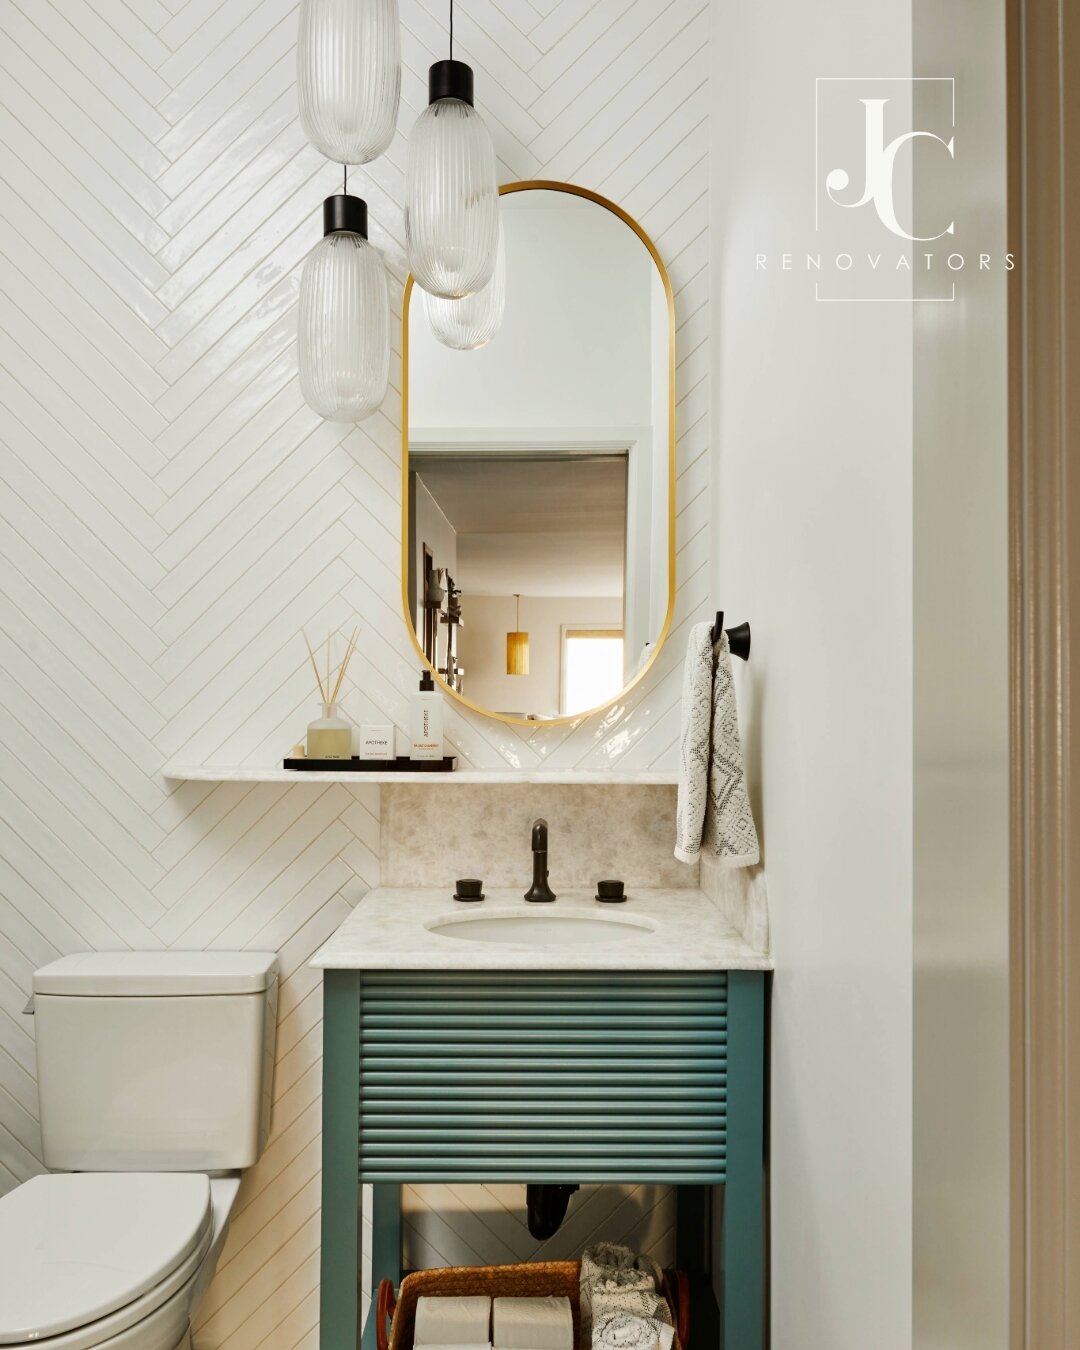 We took over the master closet to create this tiny guest powder bath.  The new layout allowed for a more functional space.  The herringbone tile and dramatic lighting were the icing on the cake.

Designer: @jcrenovators
Photographer: @andrewpetrich

